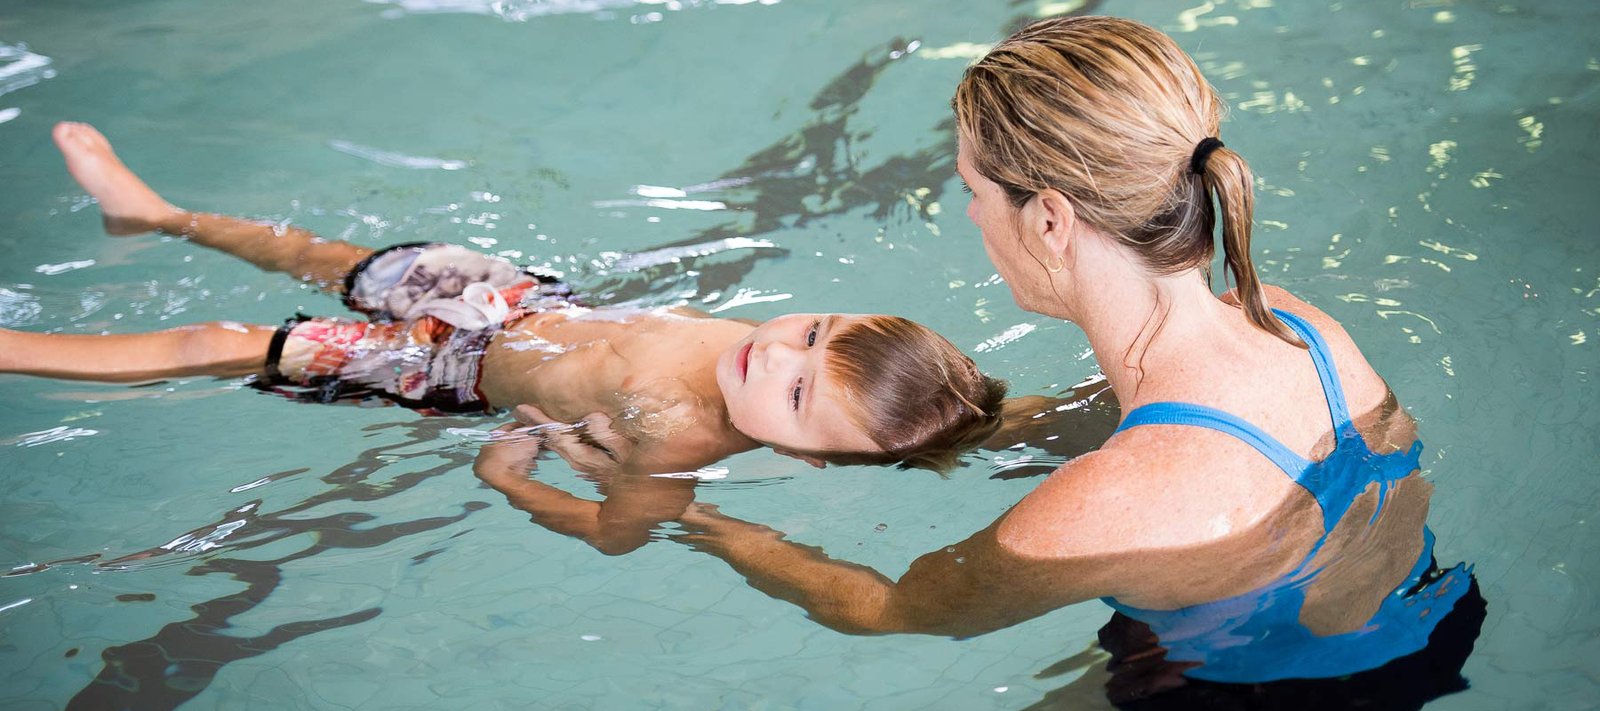 The Gentle Swim SchoolWe pride ourselves on our gentle approach to Learn To Swim. We get results and tailor our approach to your child
View All Services